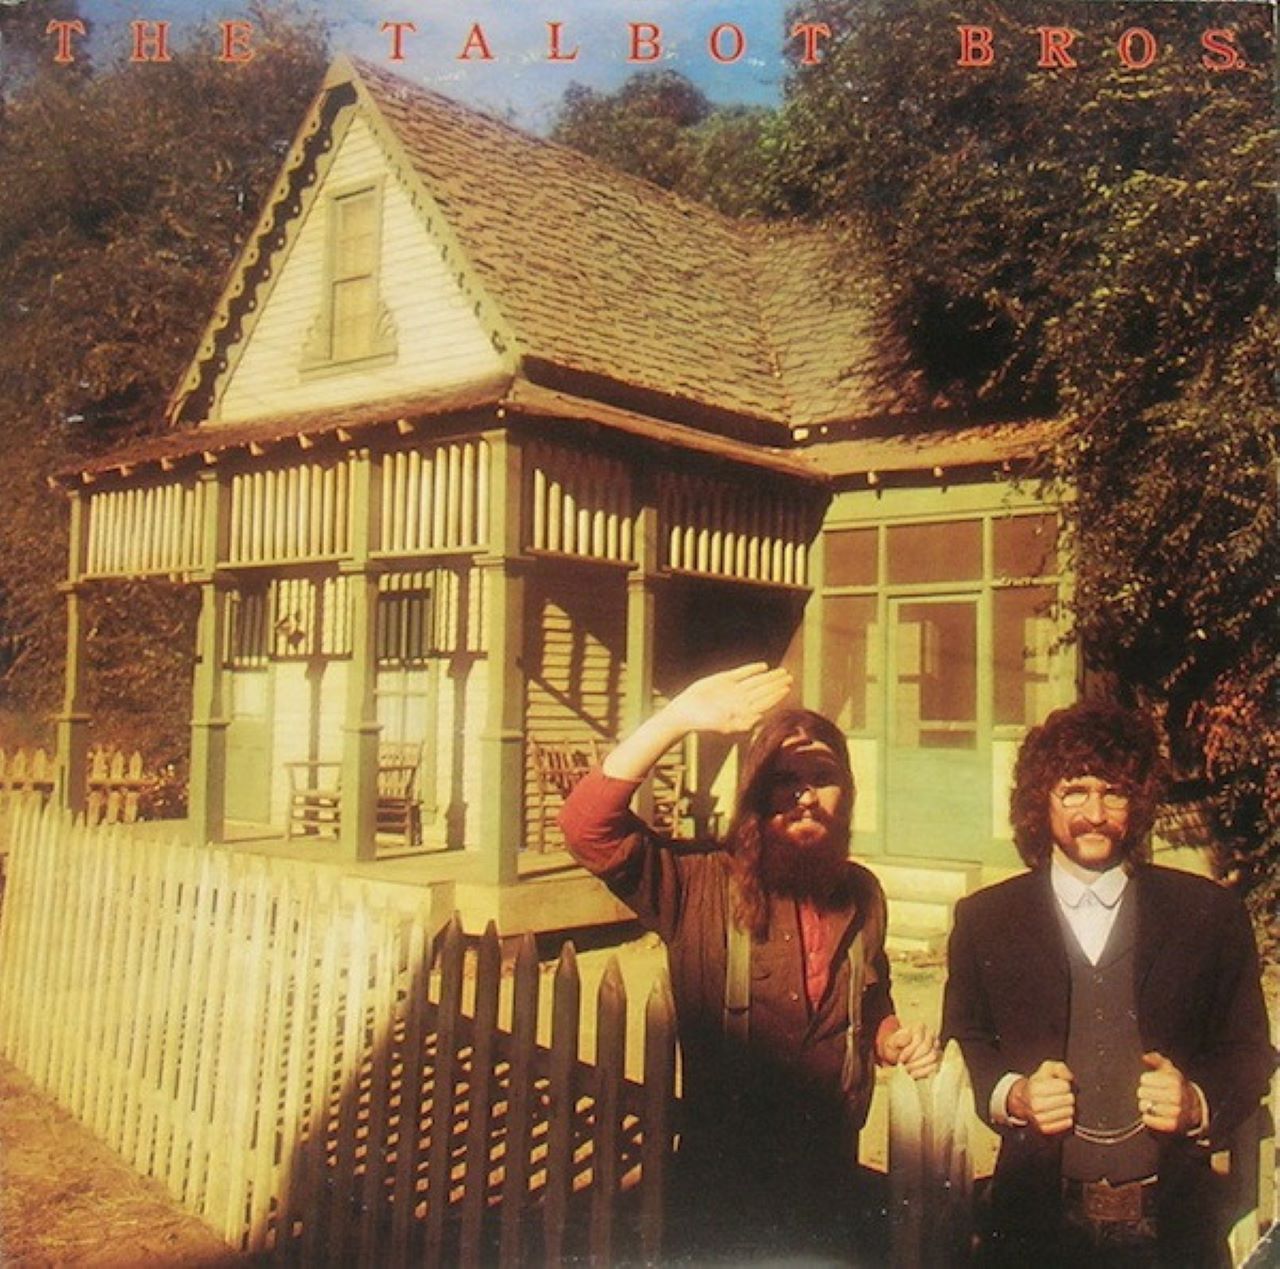 Talbot Brothers - Talbot Brothers cover album